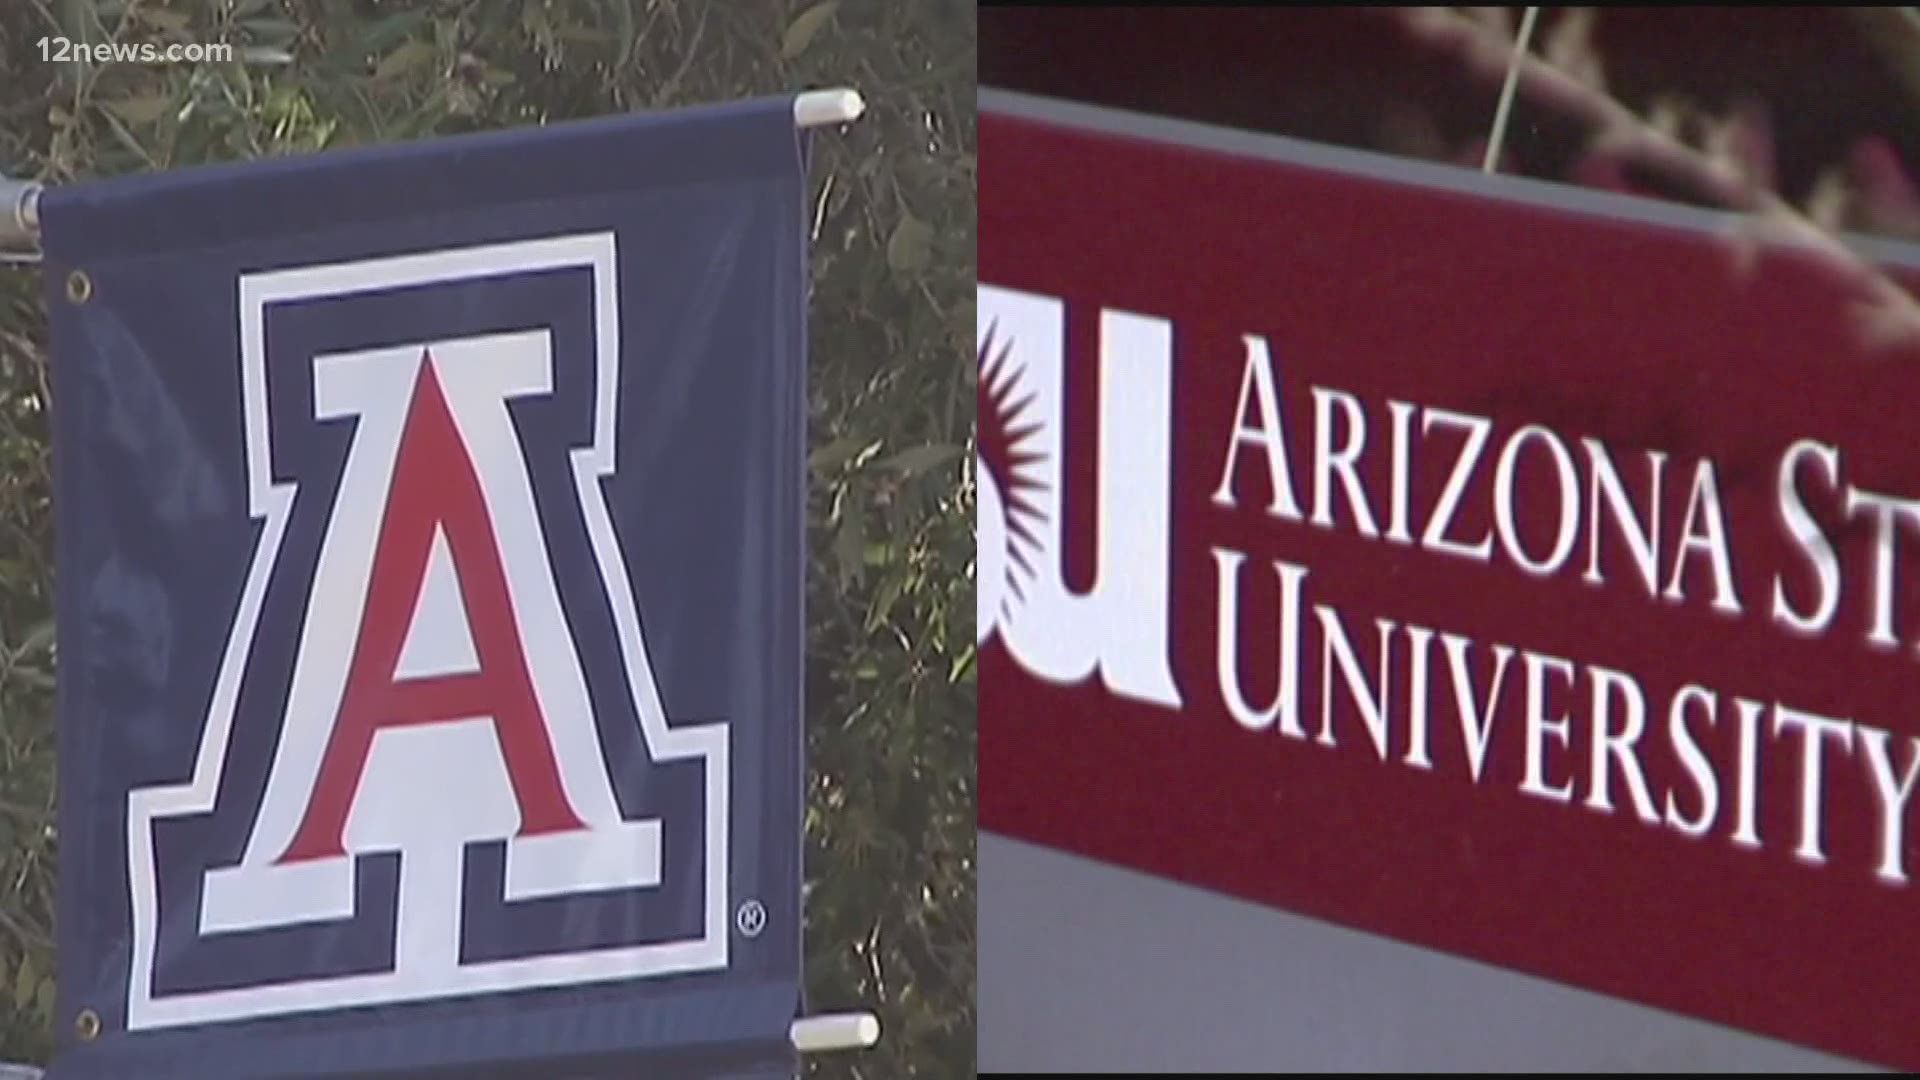 ASU officials plan to resume inperson classes in August